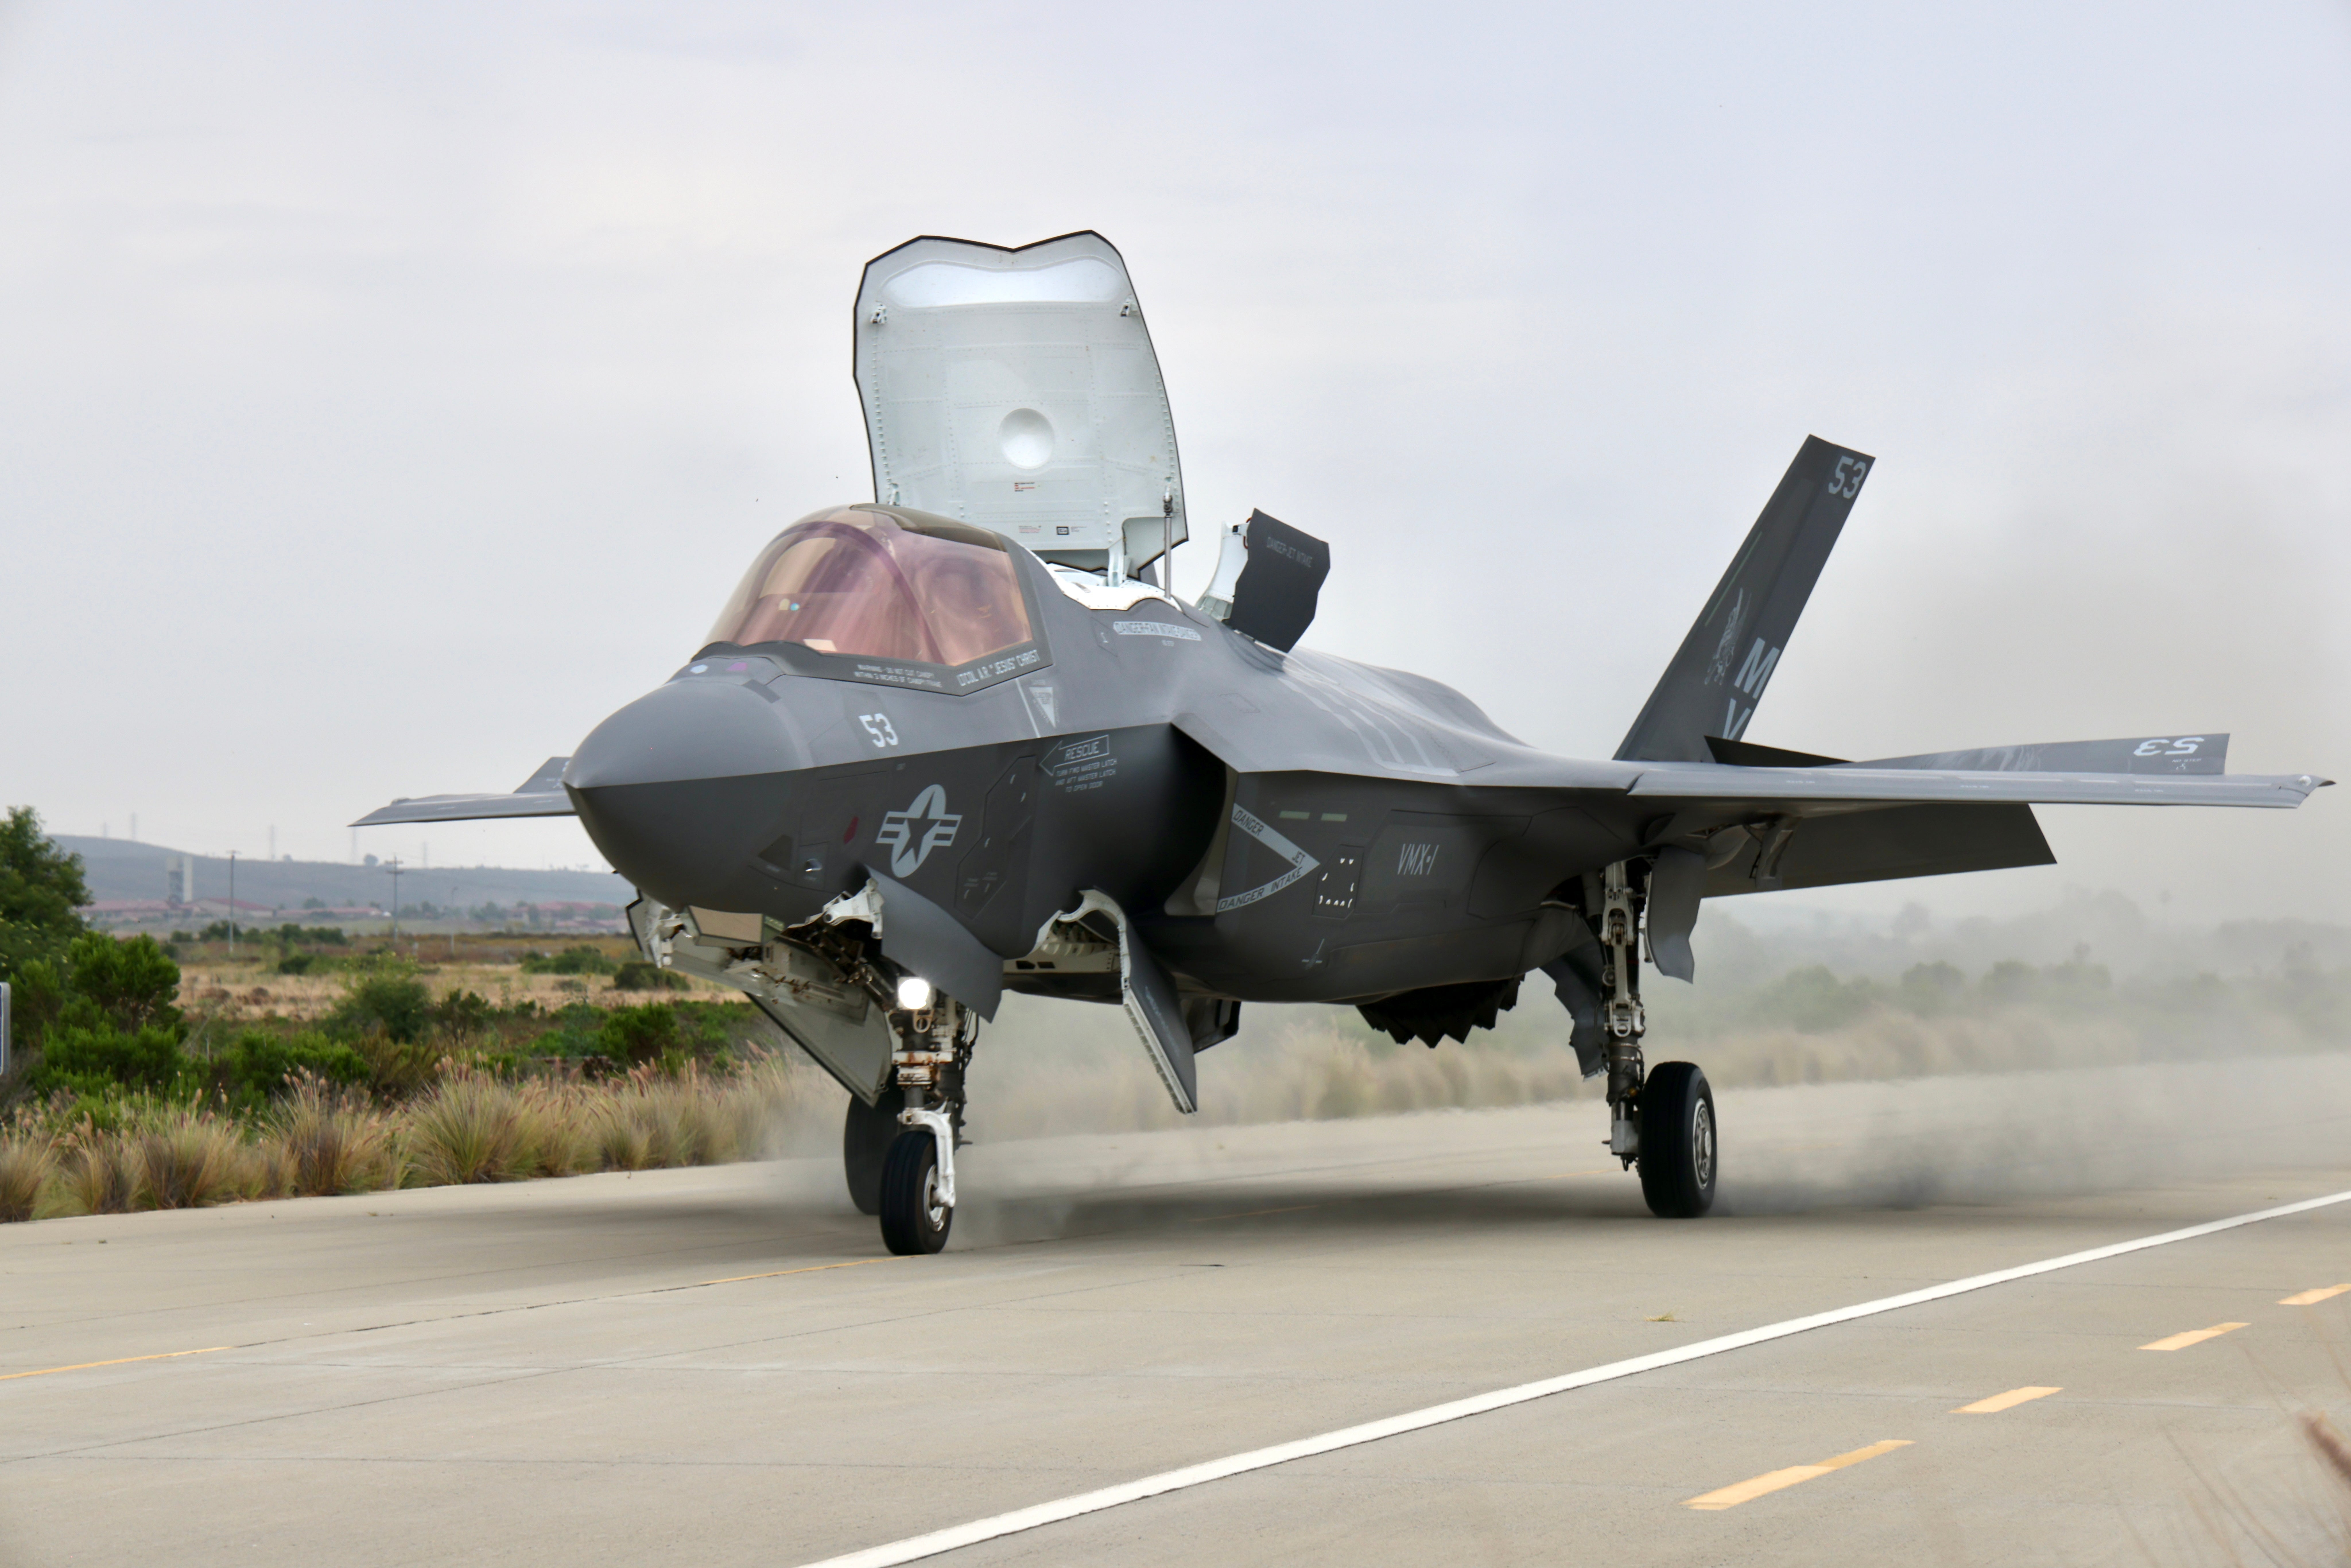 F-35B Just Touched Down On The Old Pacific Coast Highway